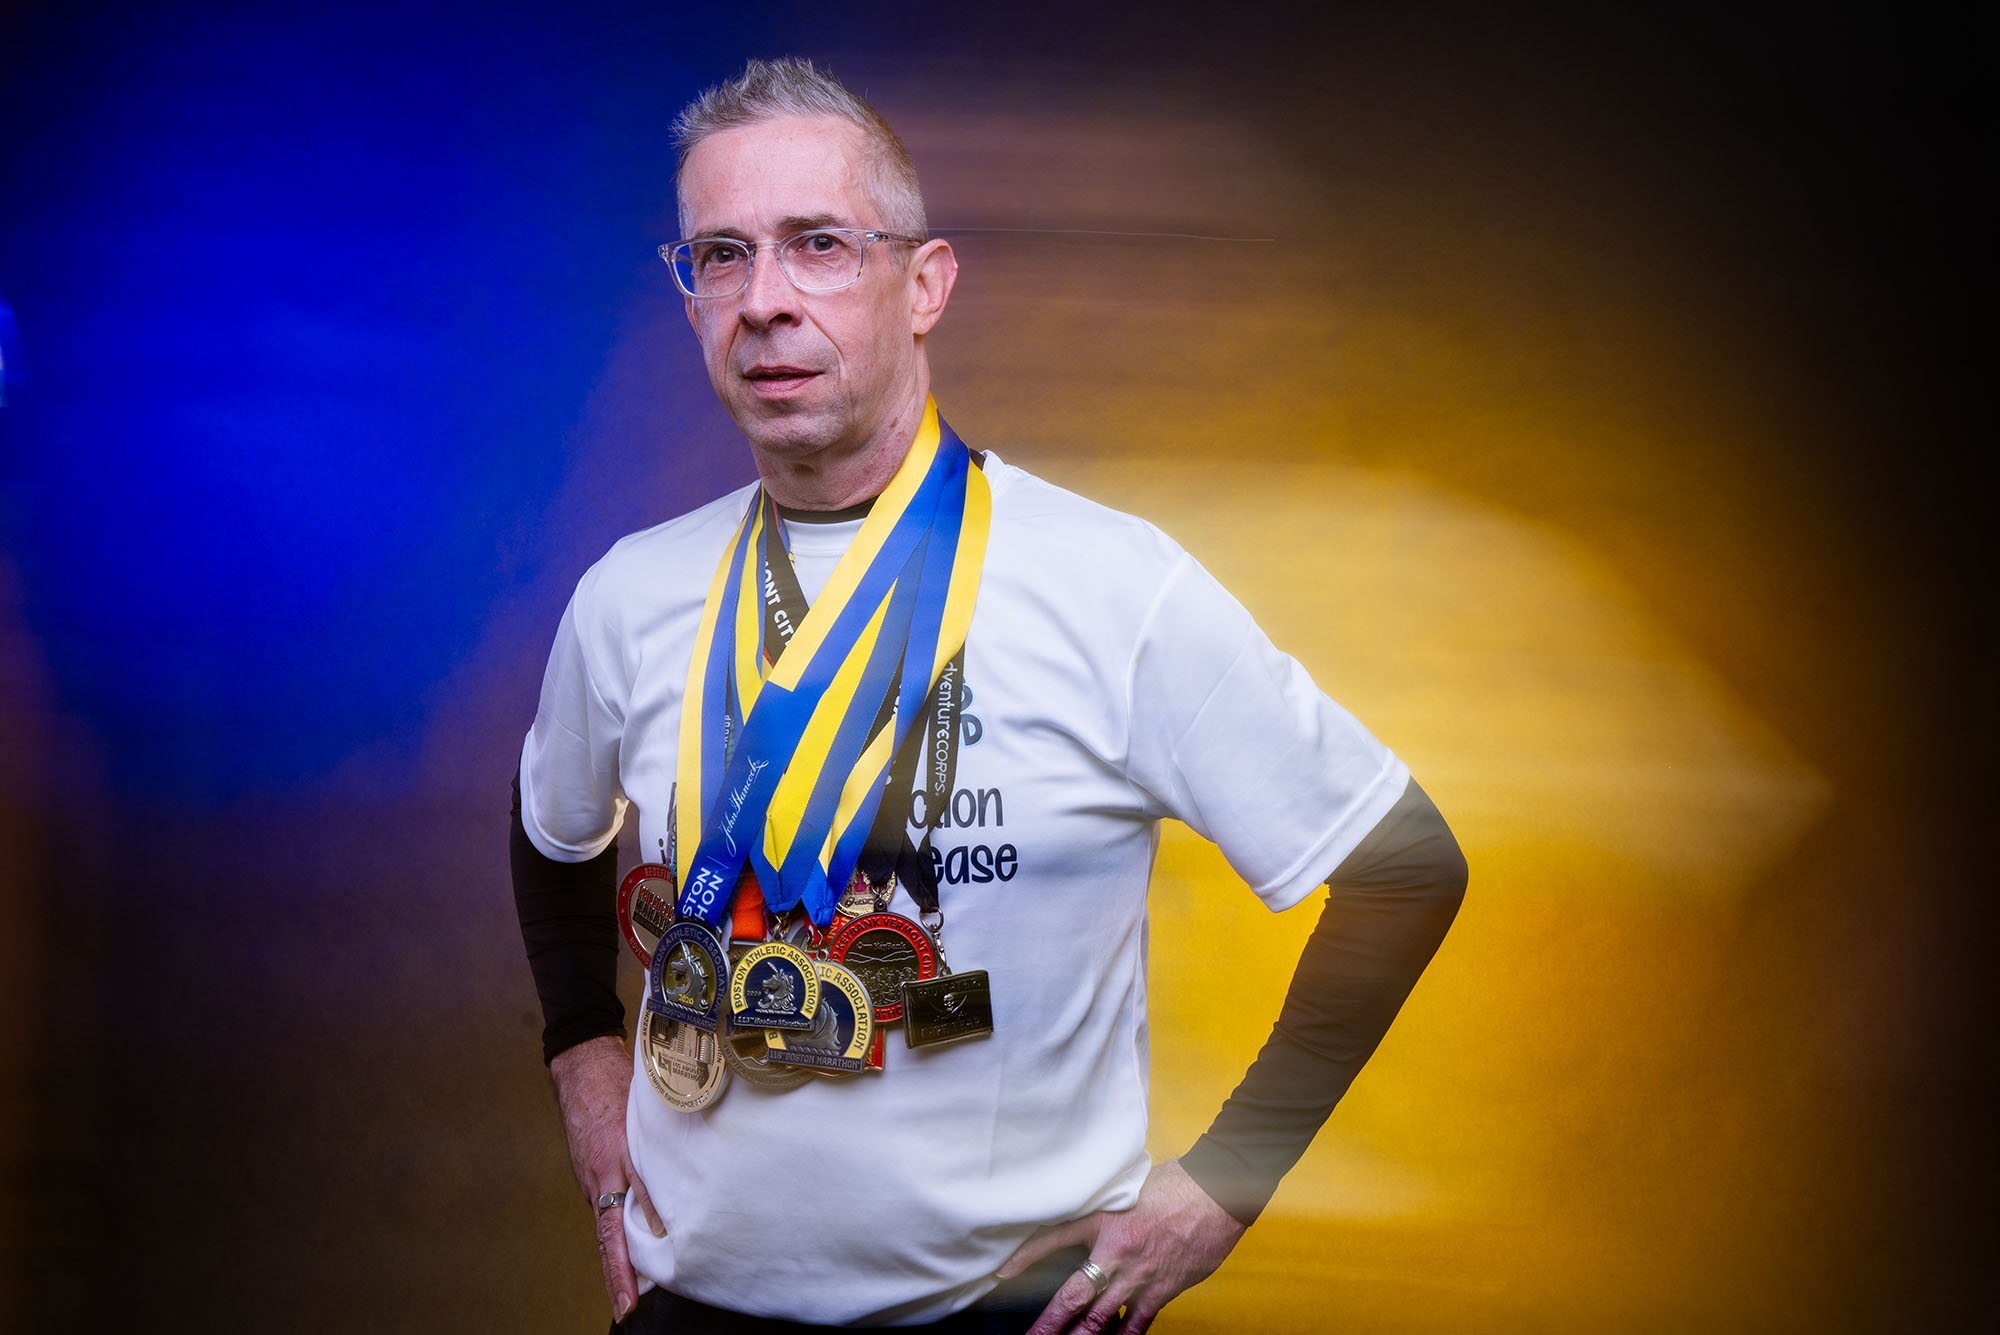 Photo: A picture of man posing with his hands on his hips. He has many medals around his neck